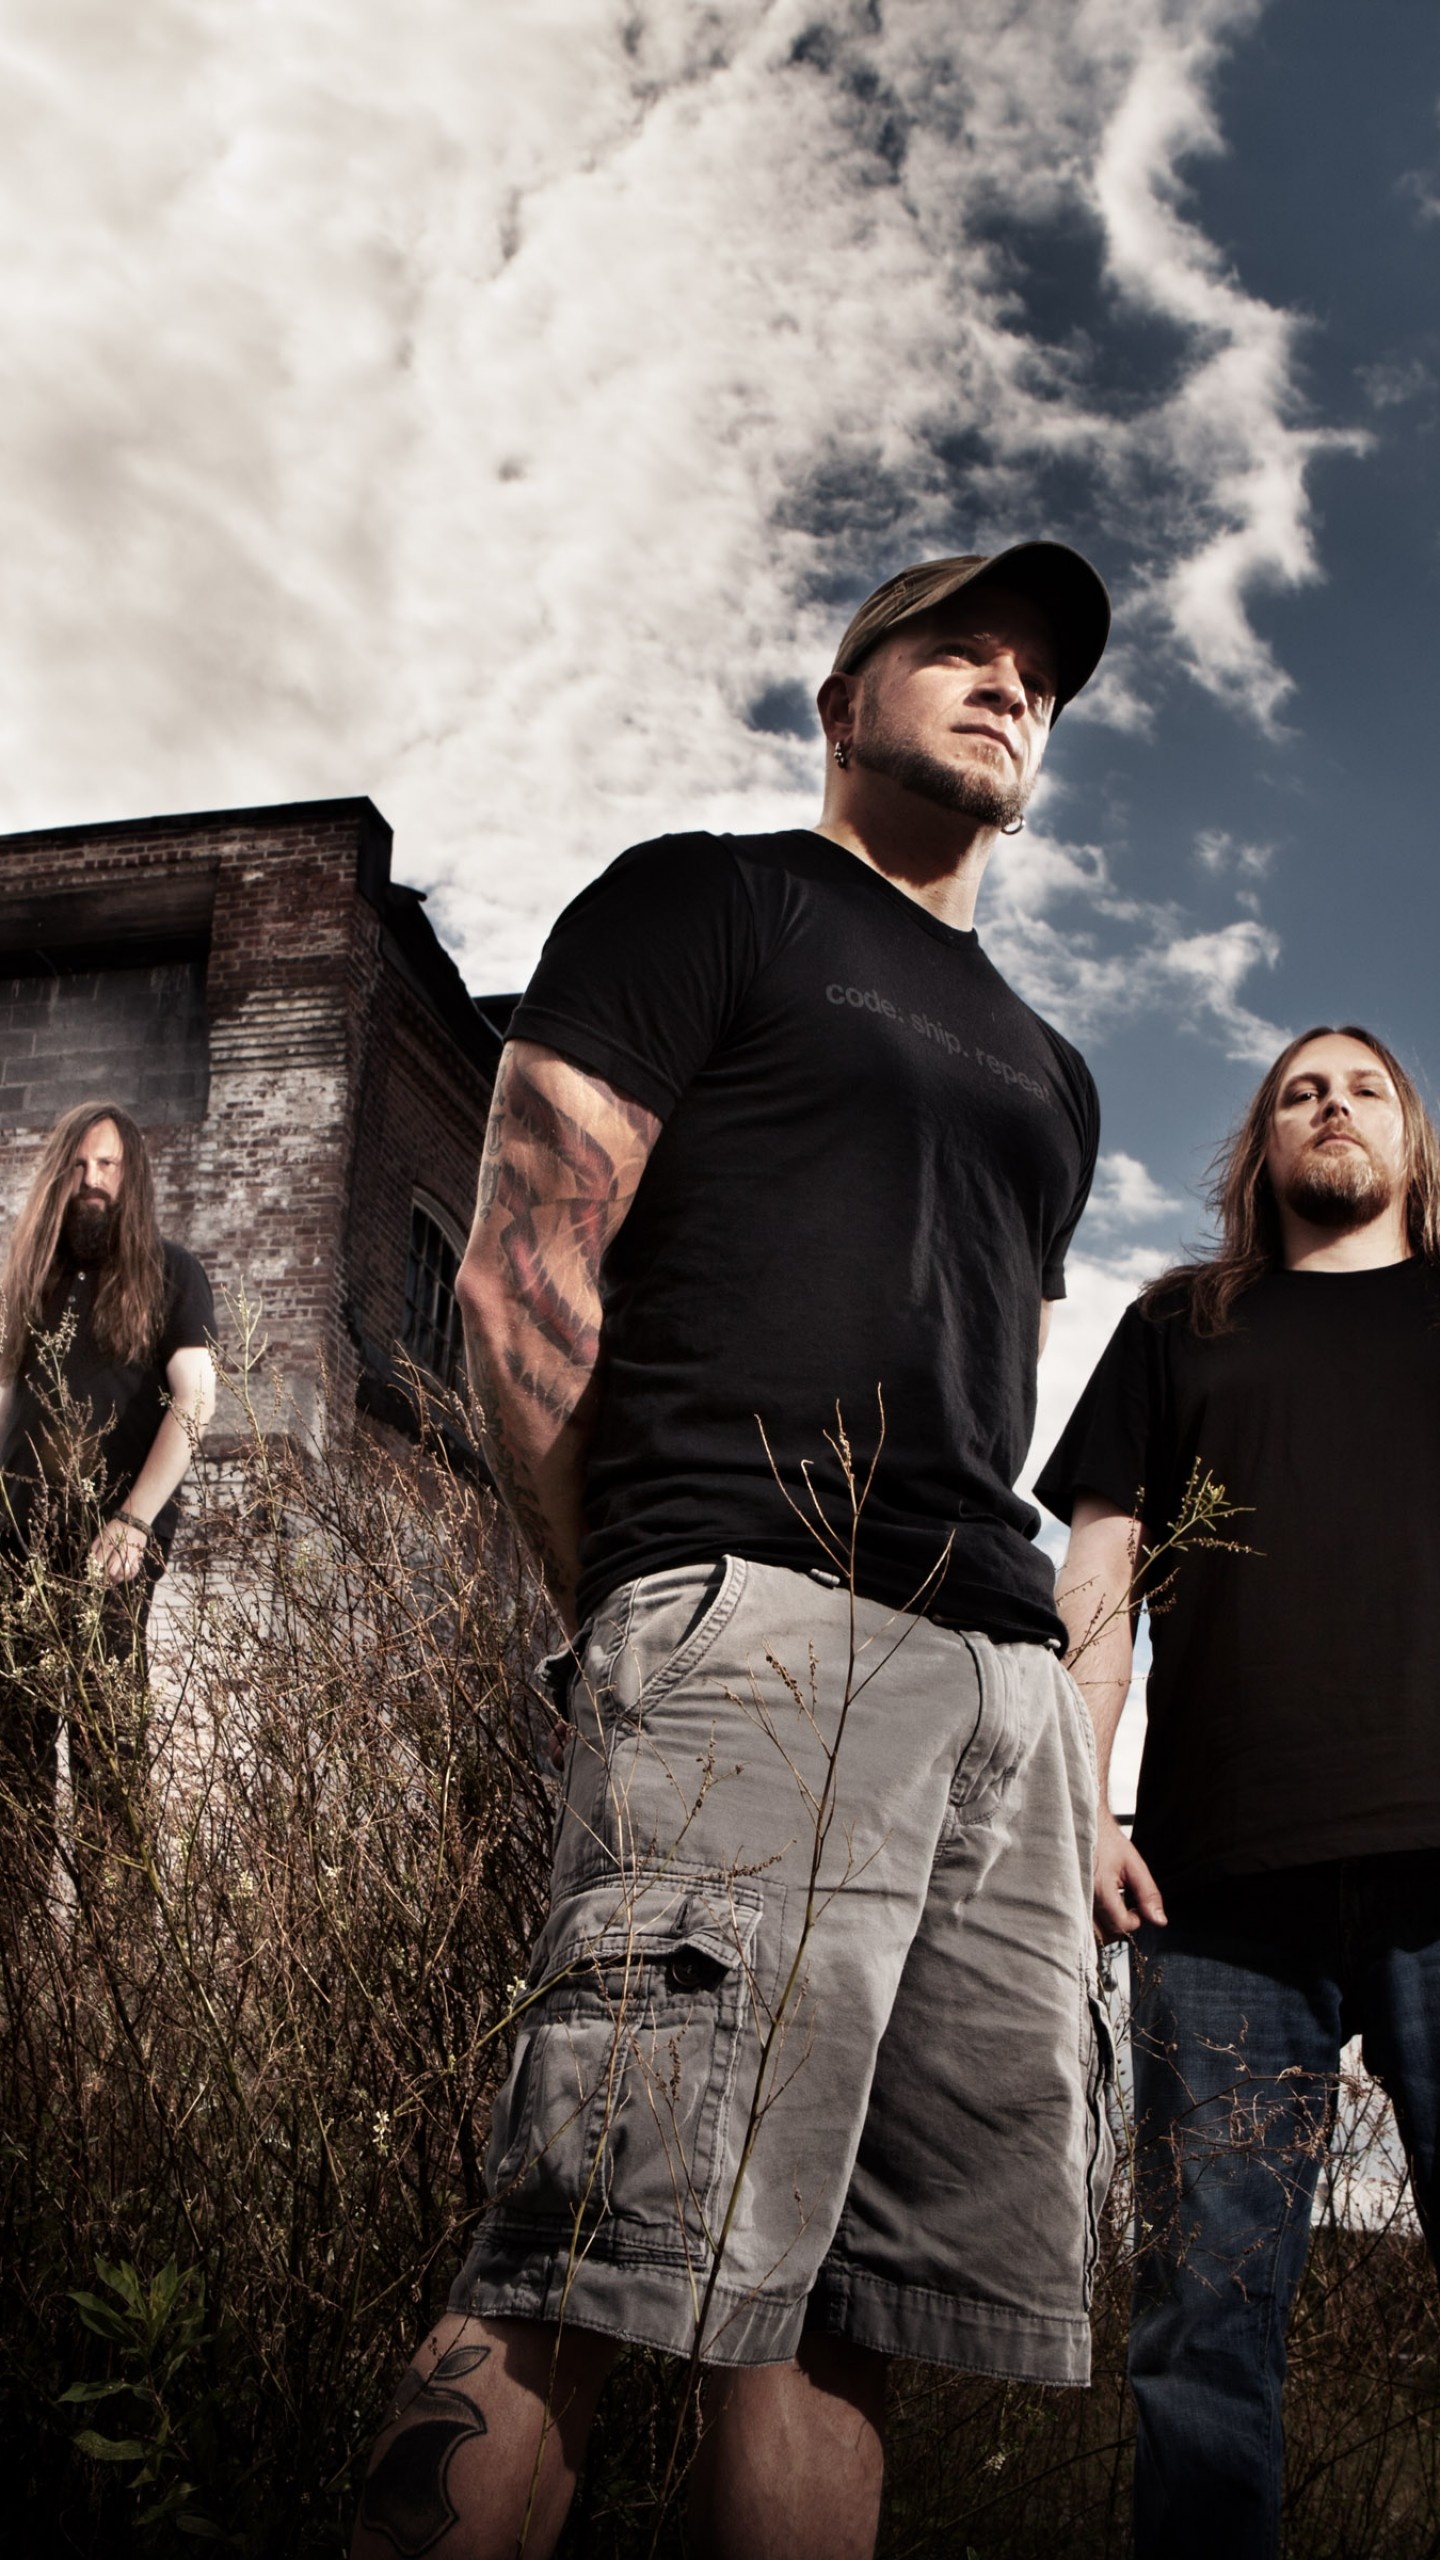 Wallpaper All That Remains, Top music artist and bands, Philip Labonte, Mike Martin, Oli Hebert, Jeanne Sagan, Celebrities #5140 1440x2560